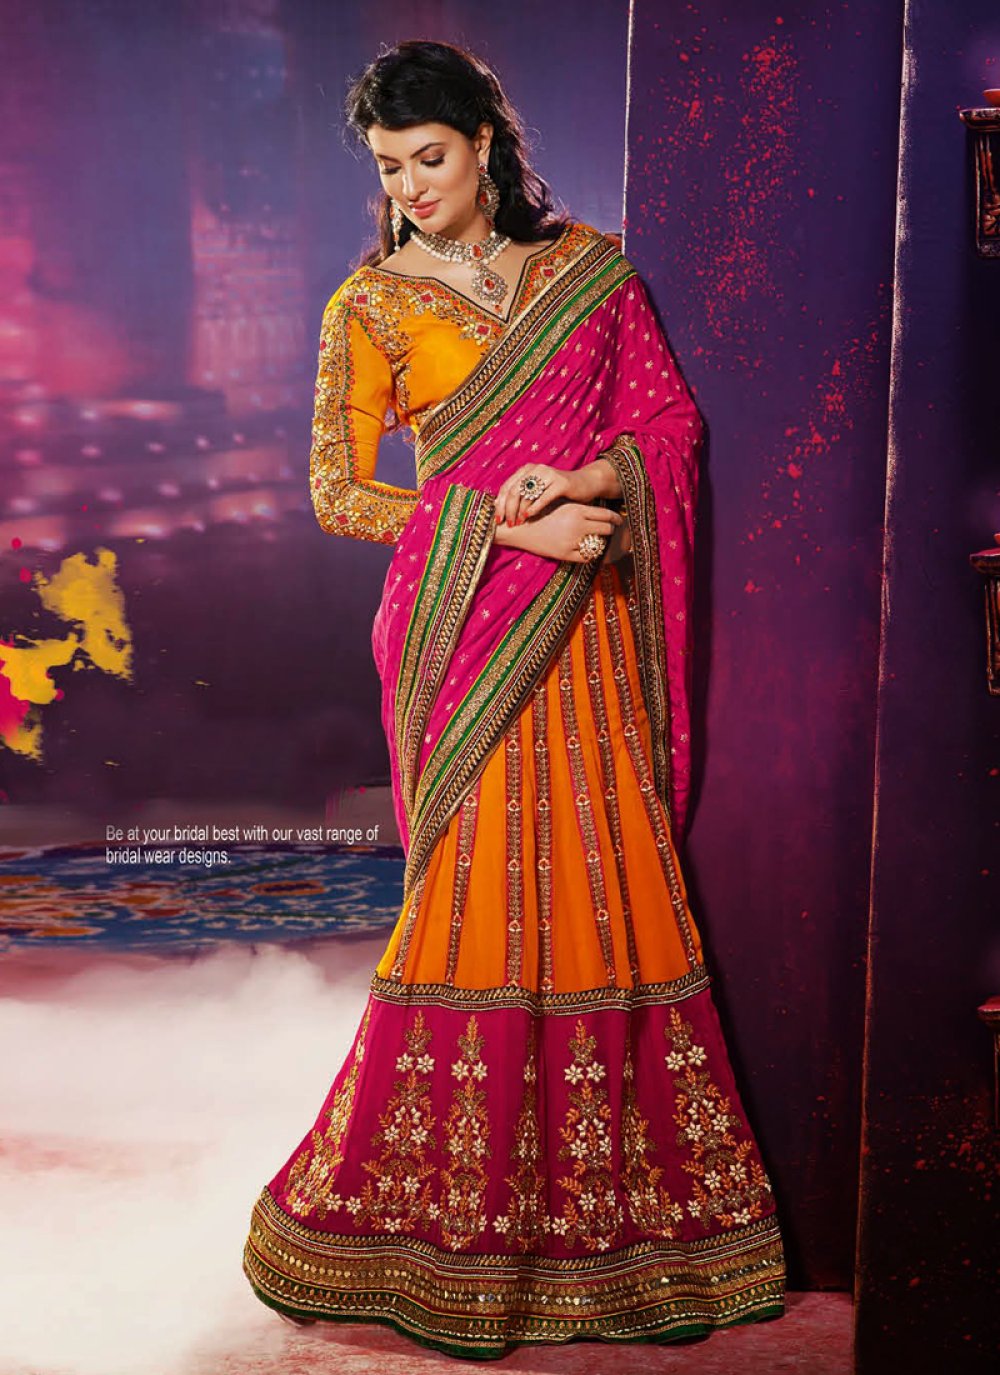 The Most Gorgeous South Indian Lehenga Saree Designs We Spotted! | Party  wear indian dresses, Saree designs, Lehenga saree design